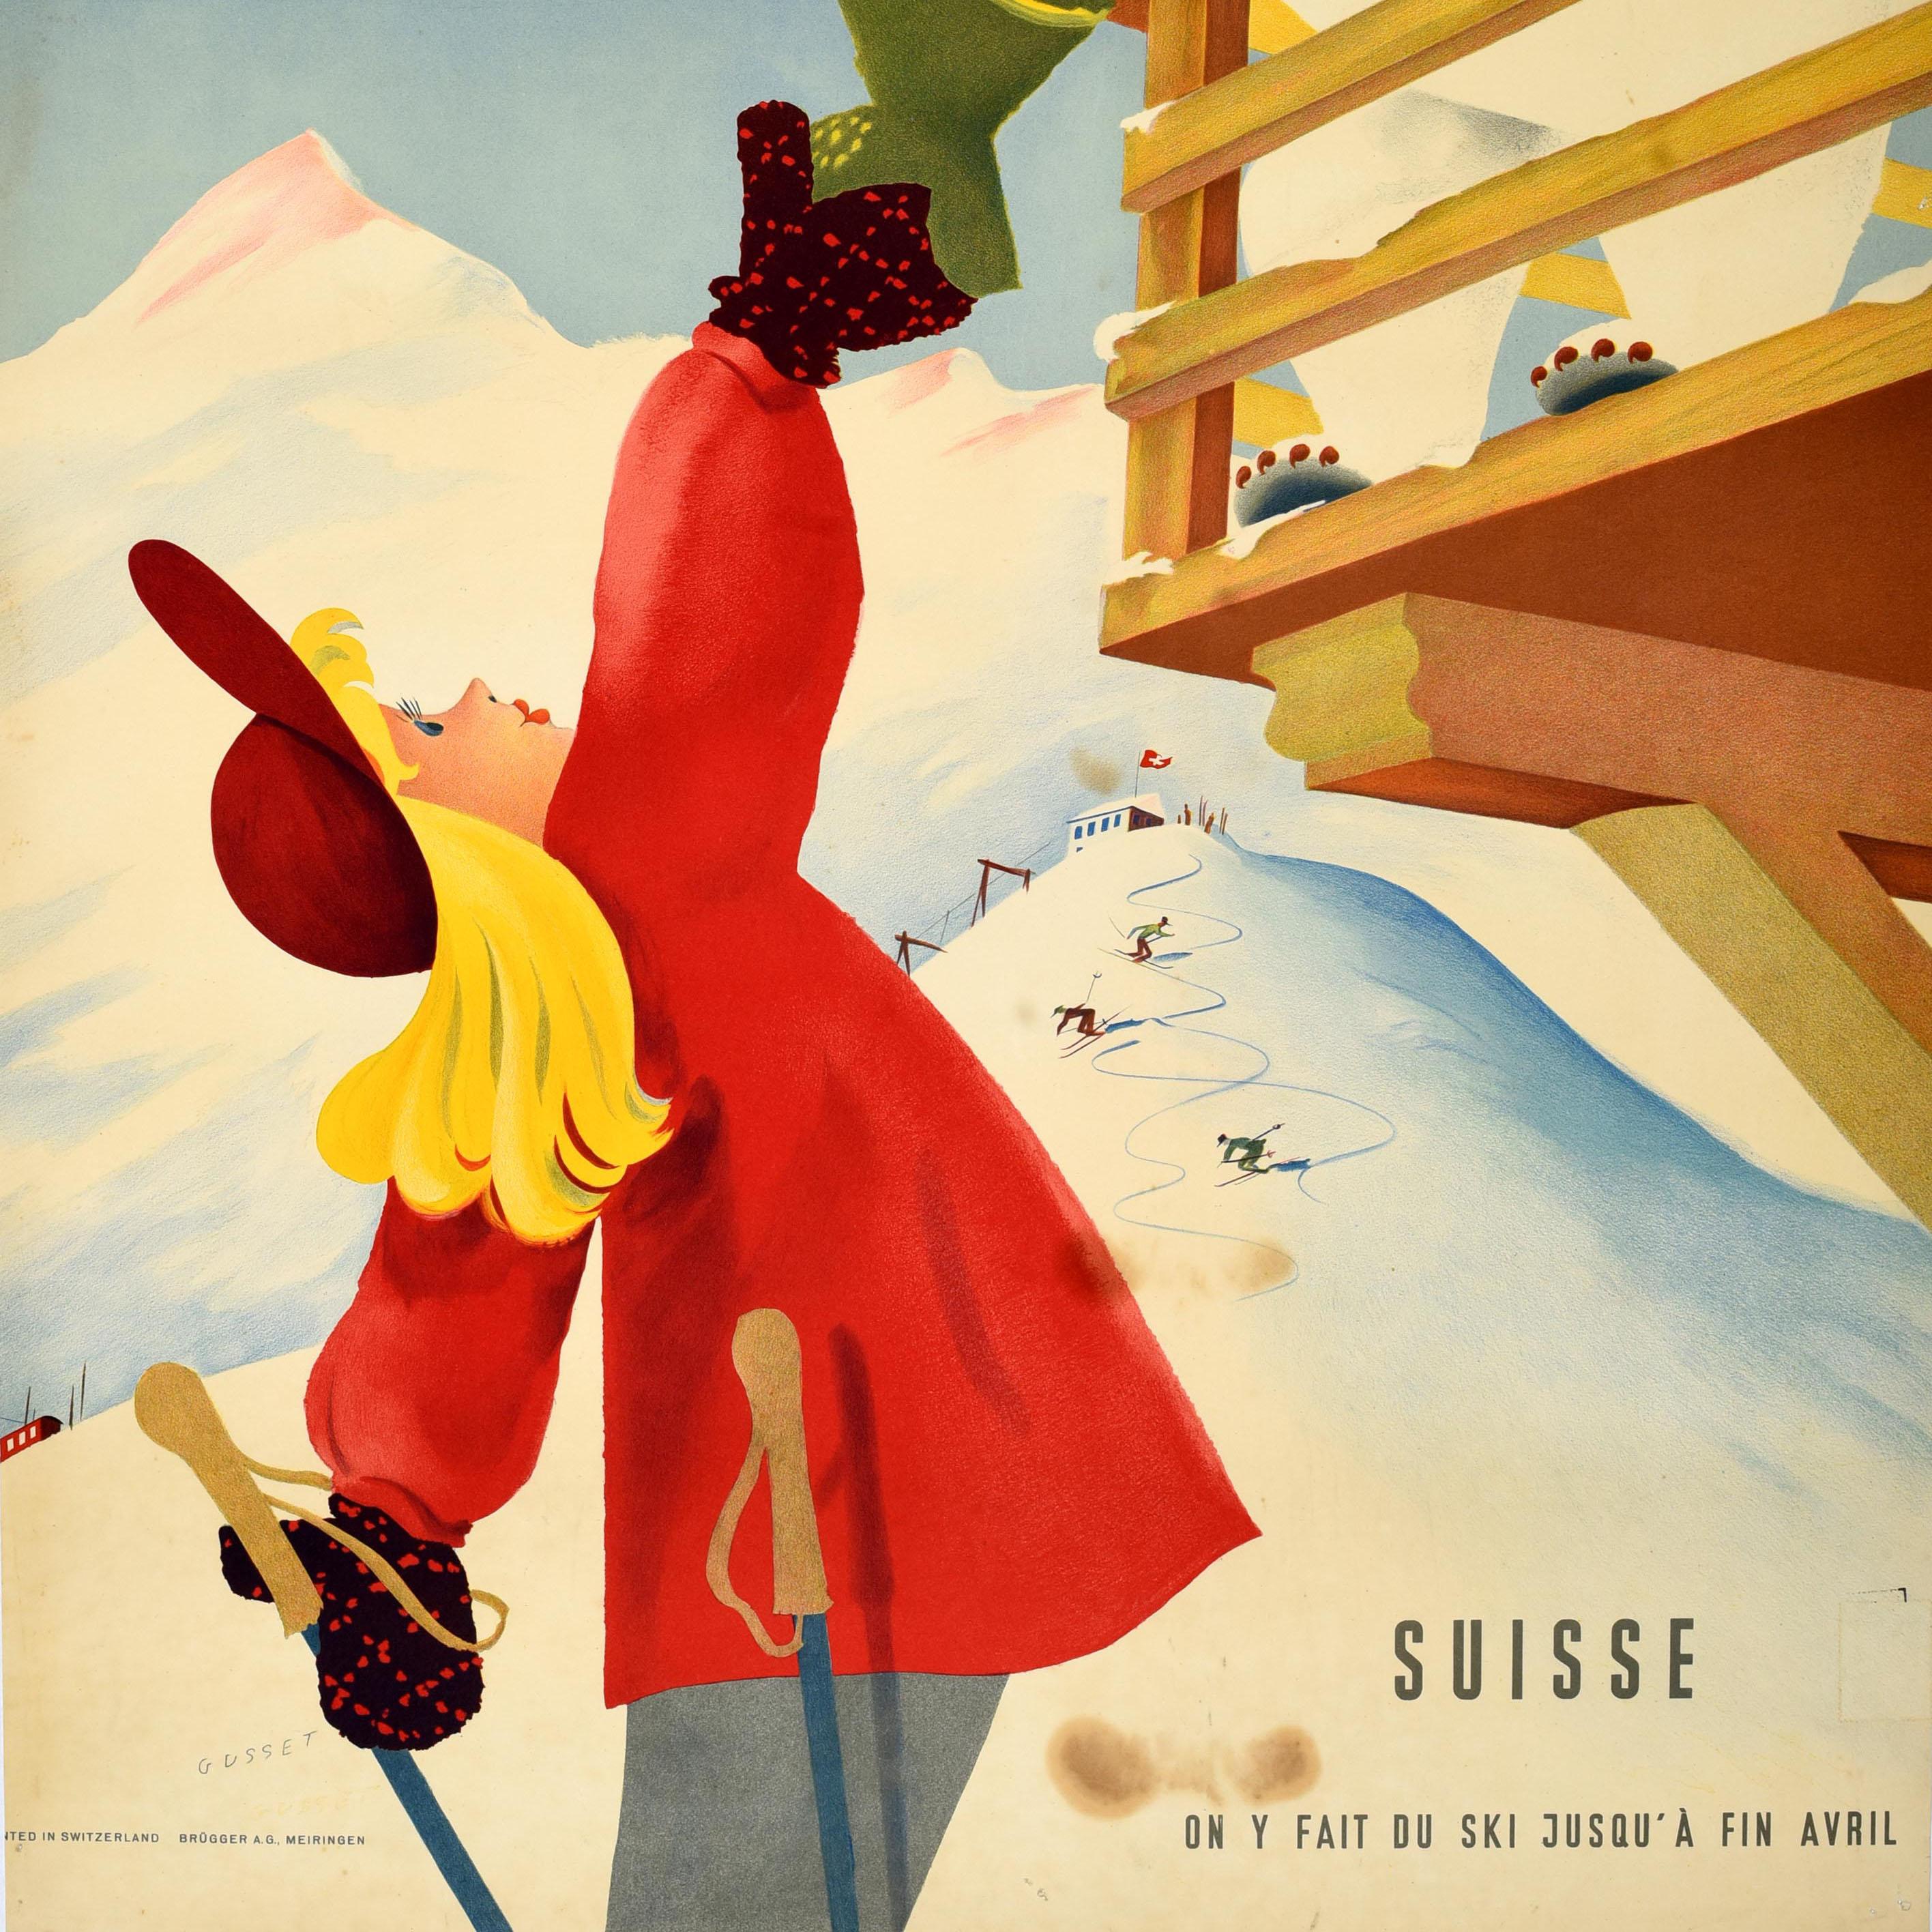 Original vintage winter sport travel poster for Berner Oberland Suisse on y fait du ski jusqu'a fin Avril / Bernese Oberland Switzerland skiing until the end of April featuring fun artwork by Paul Gusset (1909-1975) depicting a smiling white polar